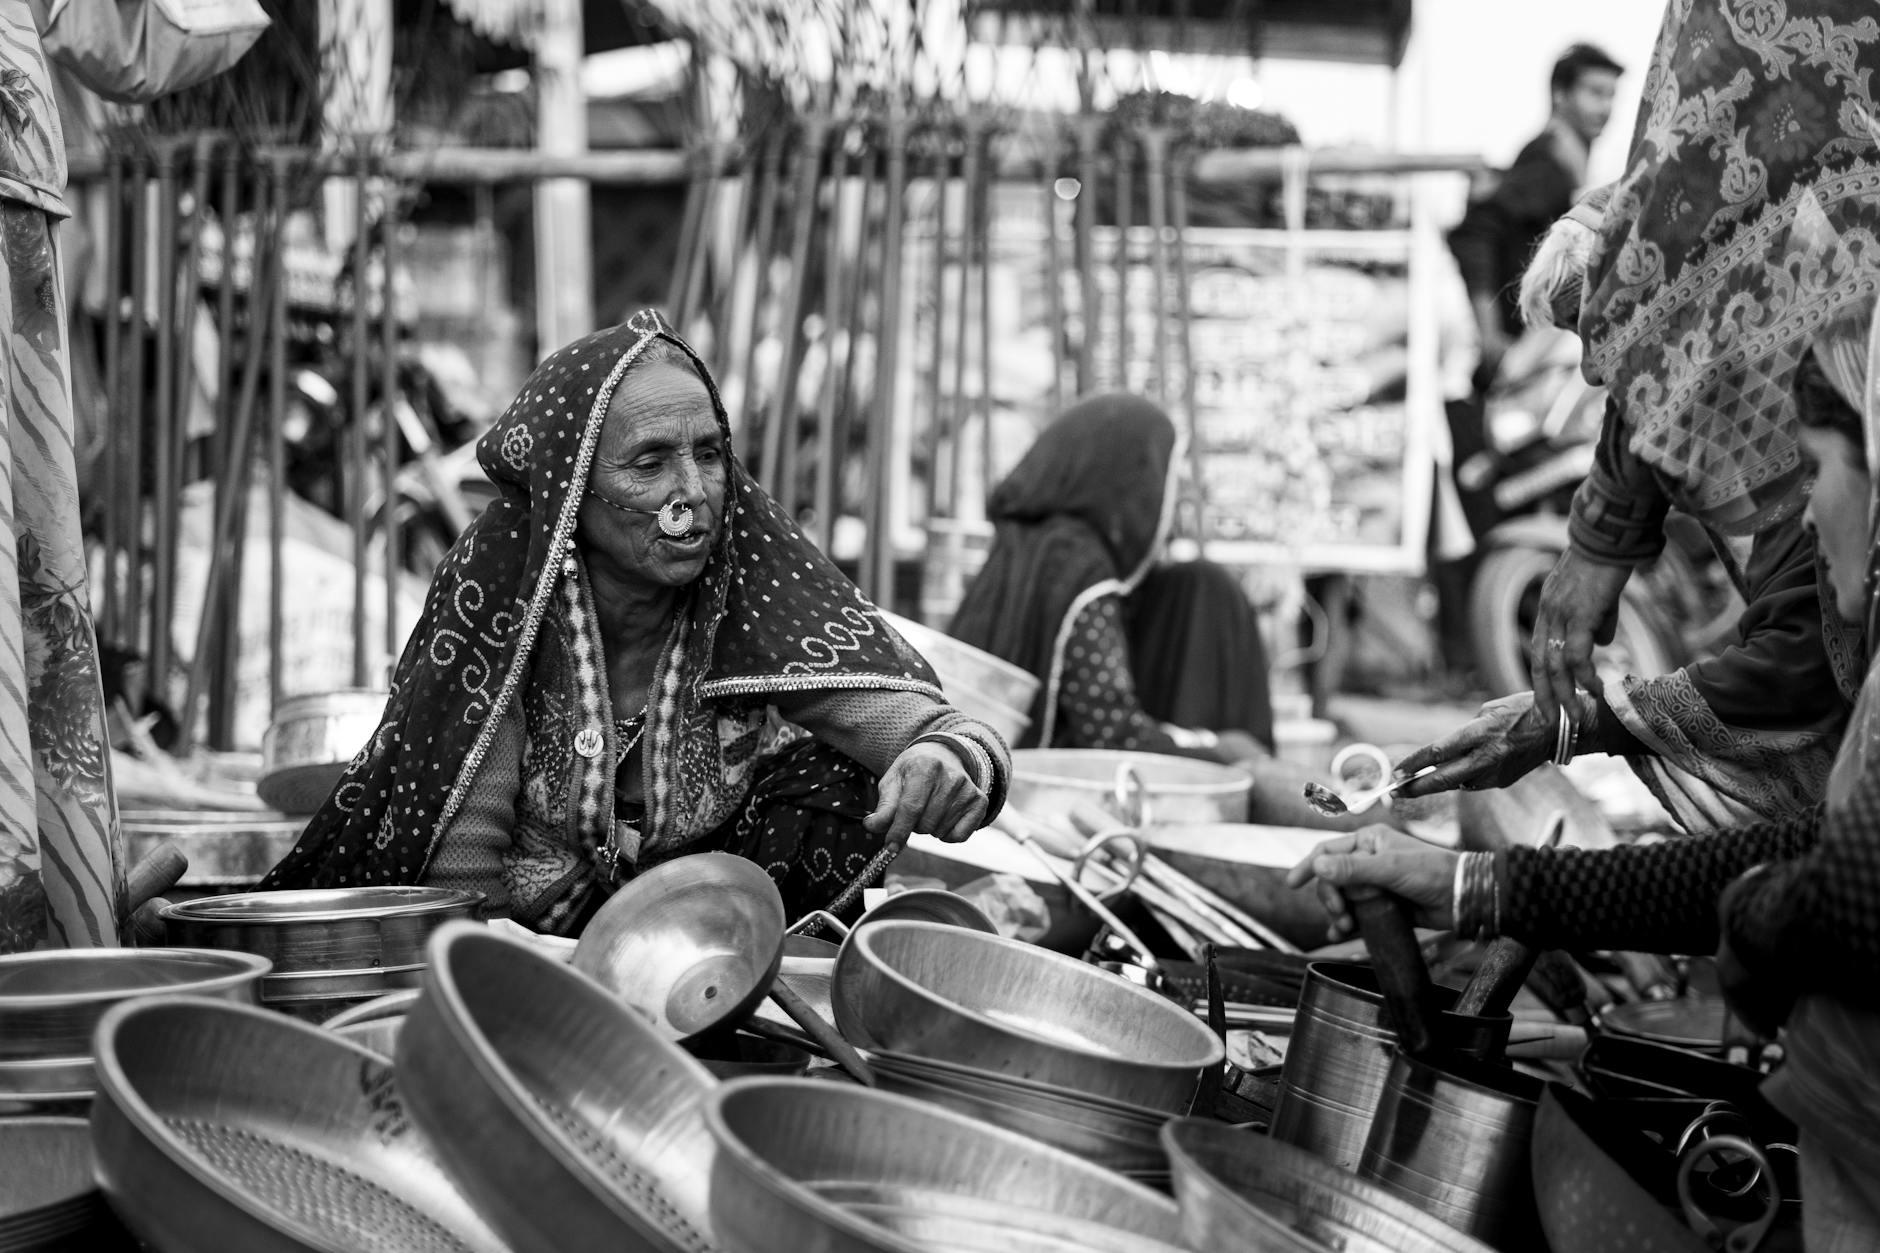 A woman selling food in a market